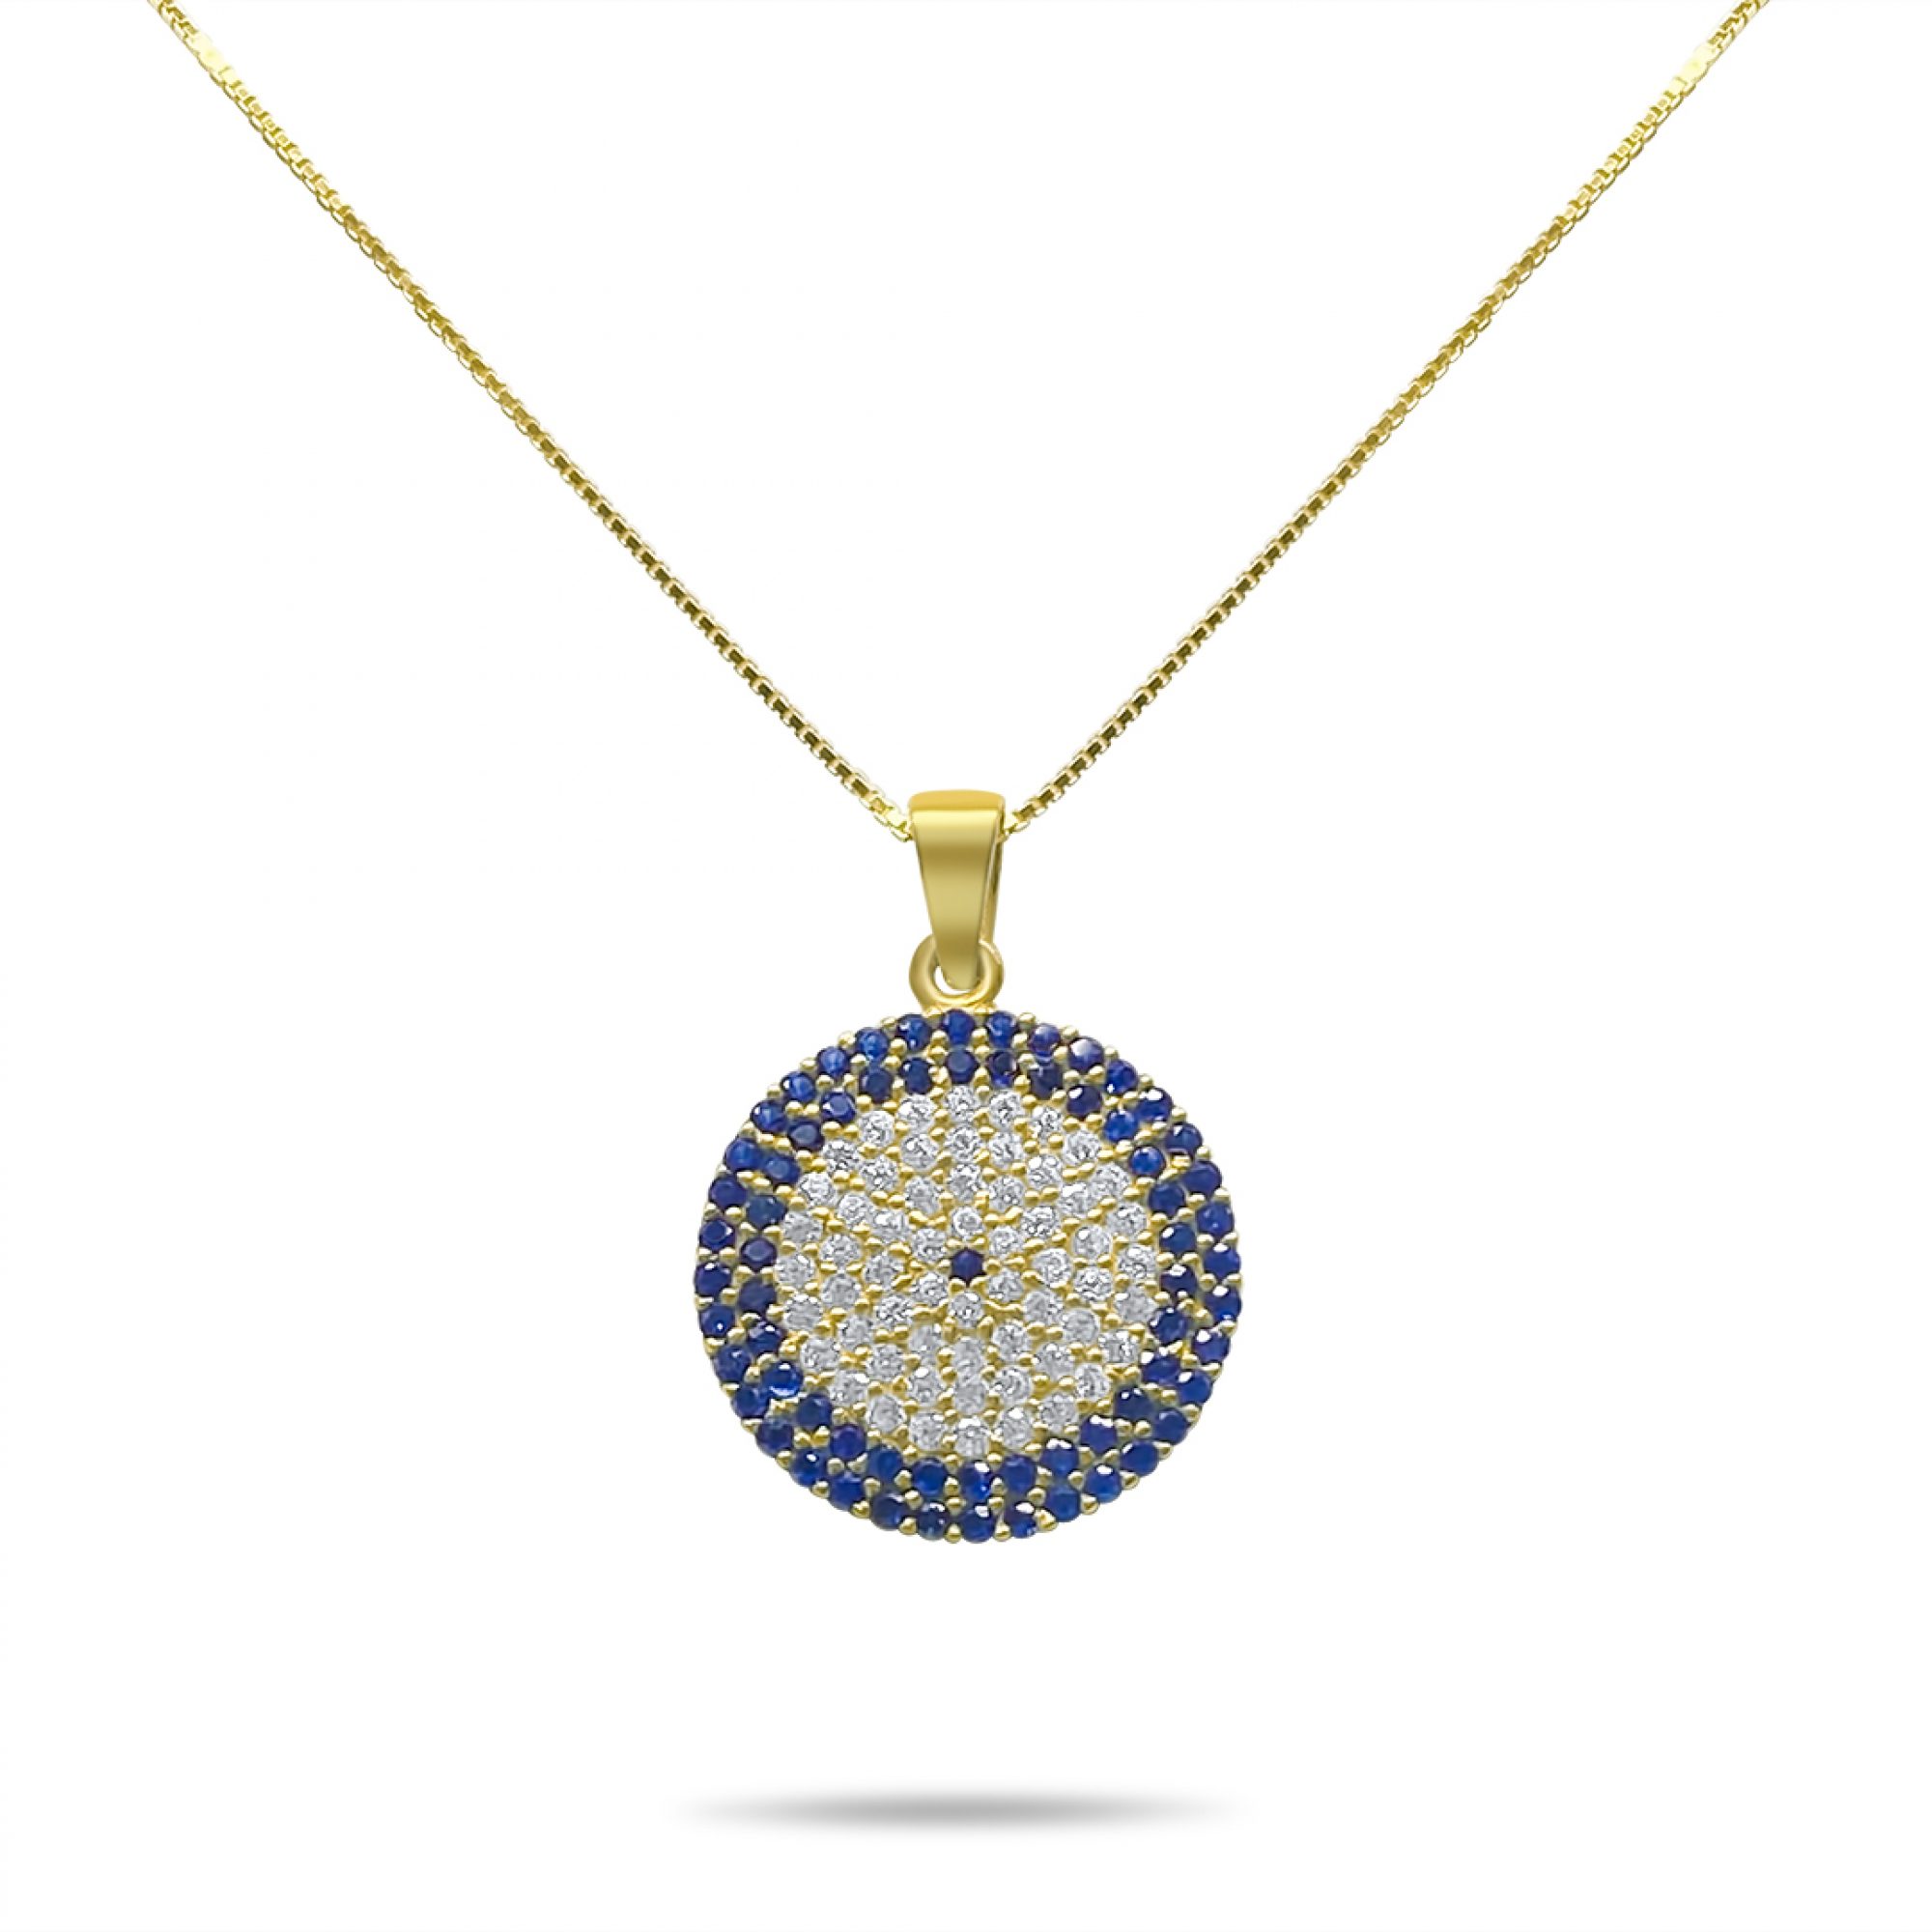 Gold plated eye pendant necklace with zircon stones